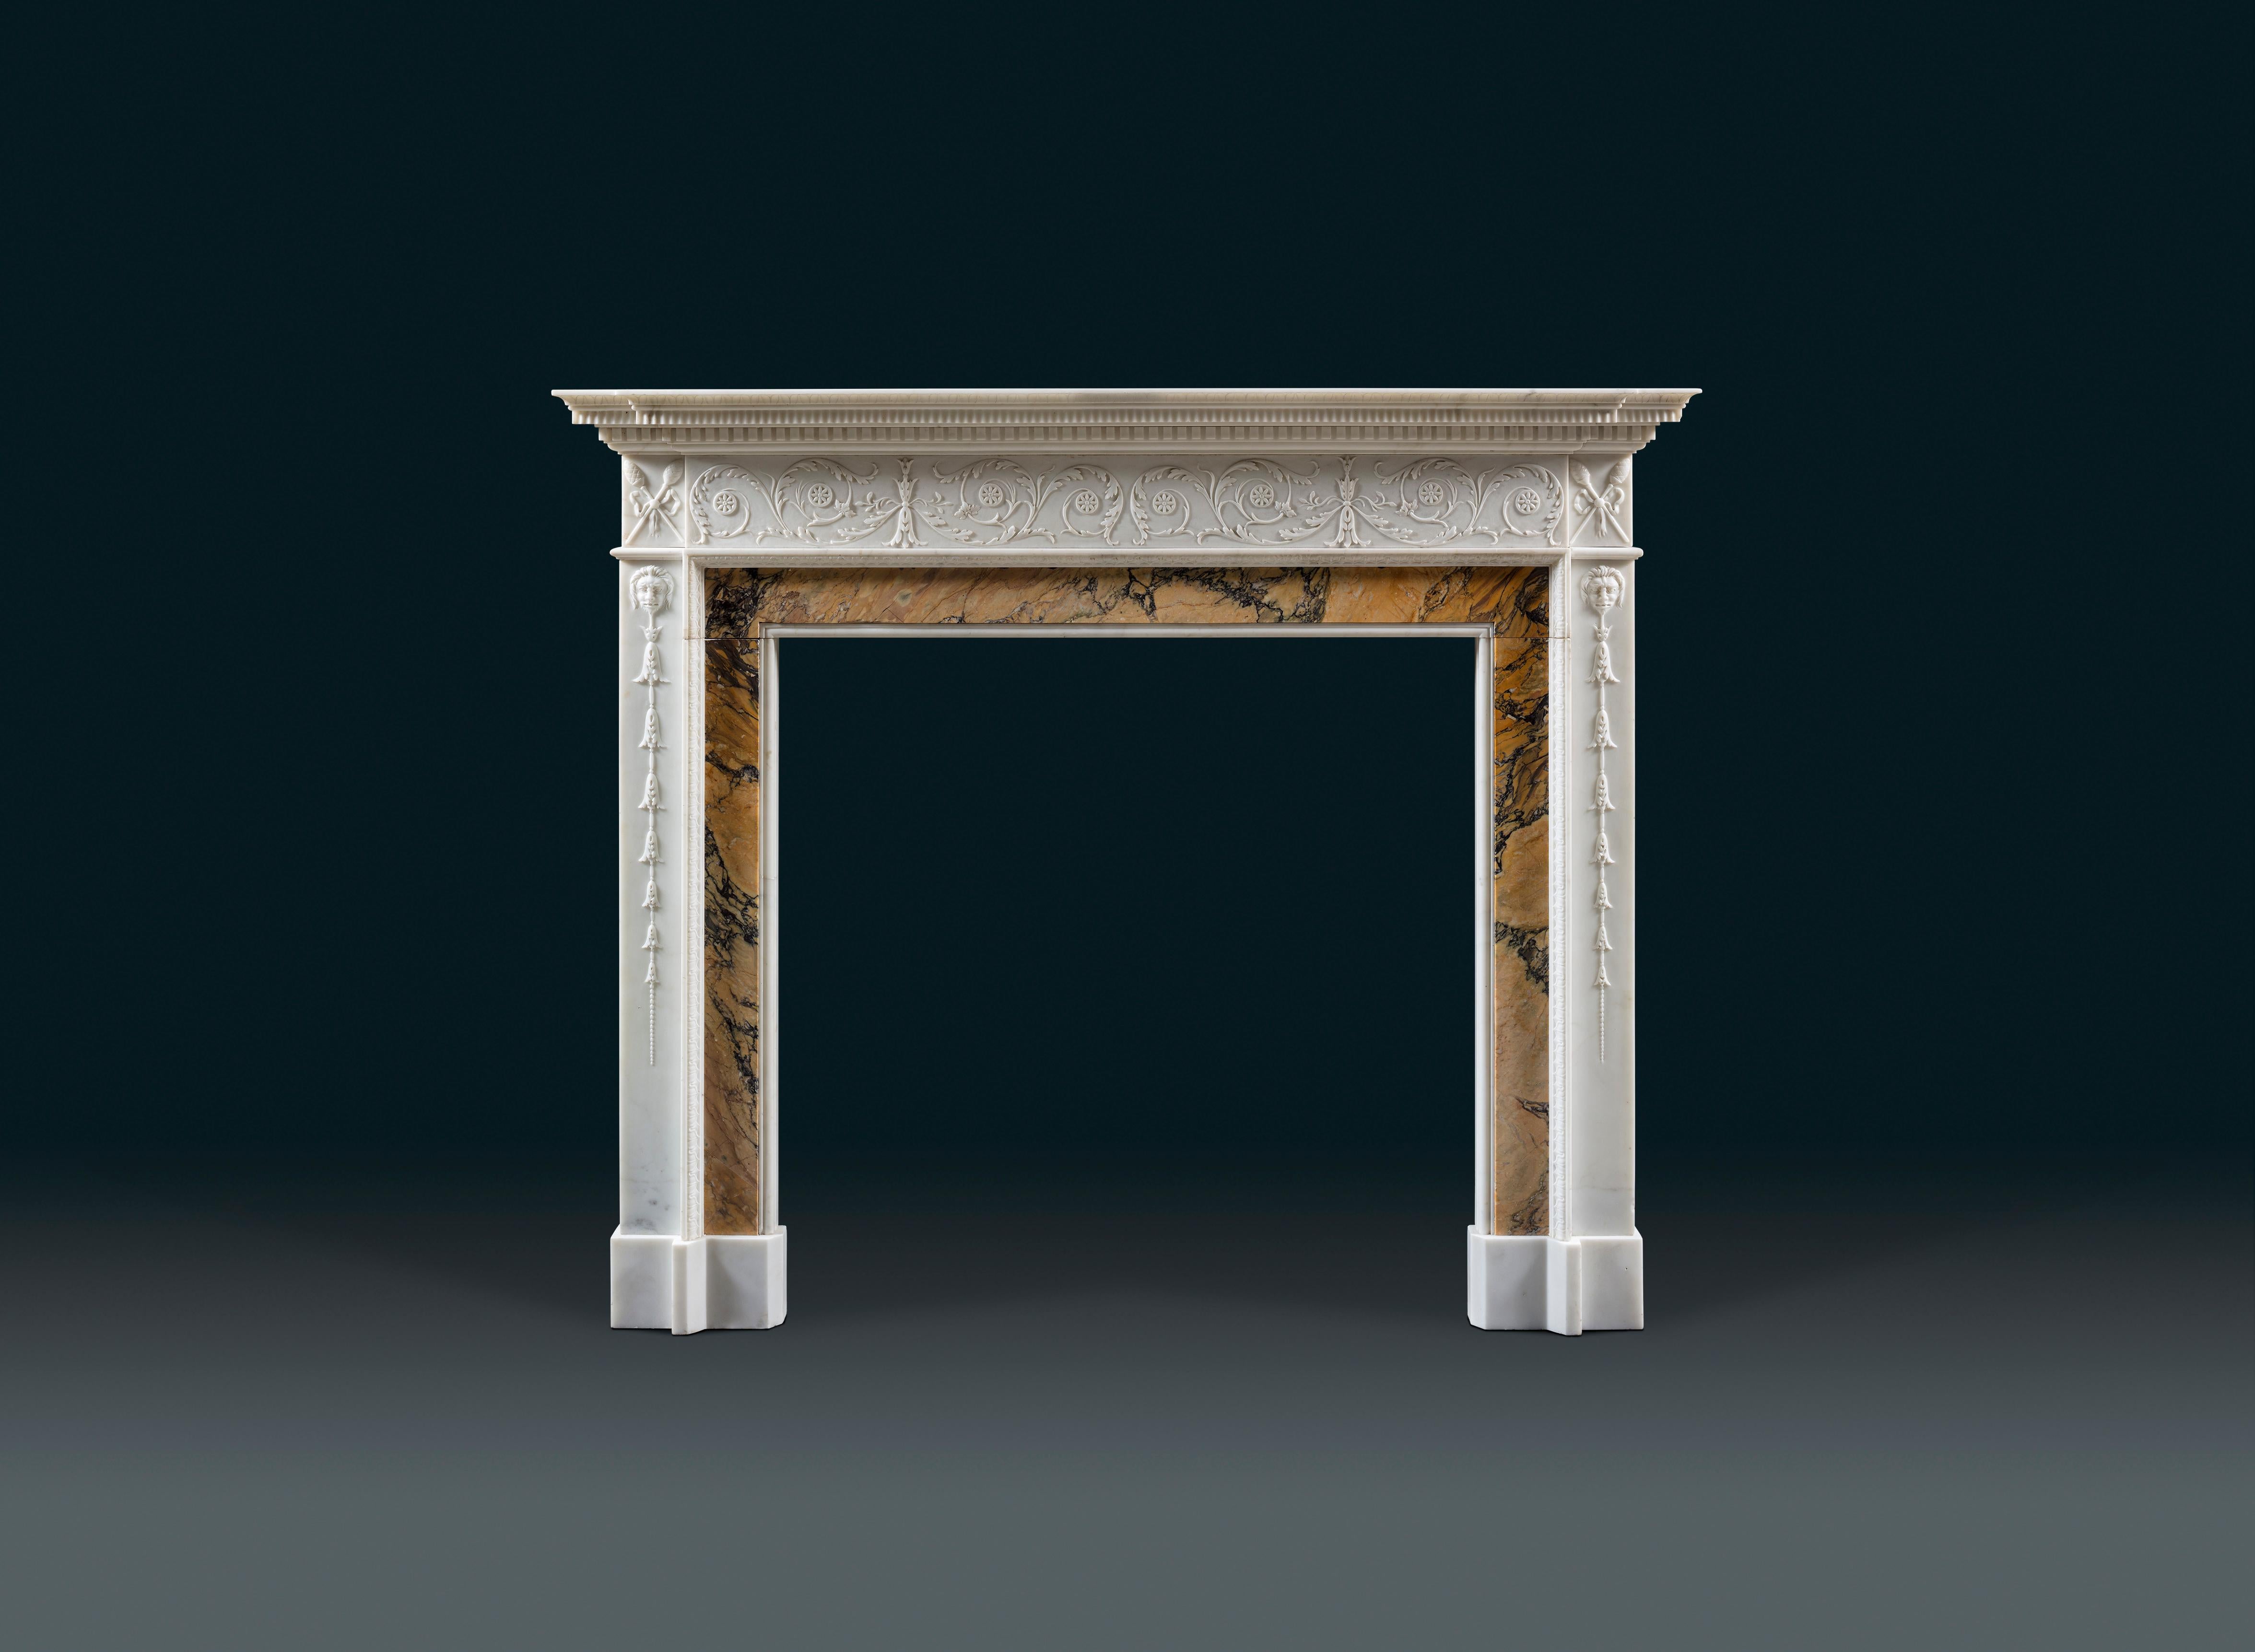 English A Carved 19th century Georgian style Chimneypiece in Statuary and Sienna Marble